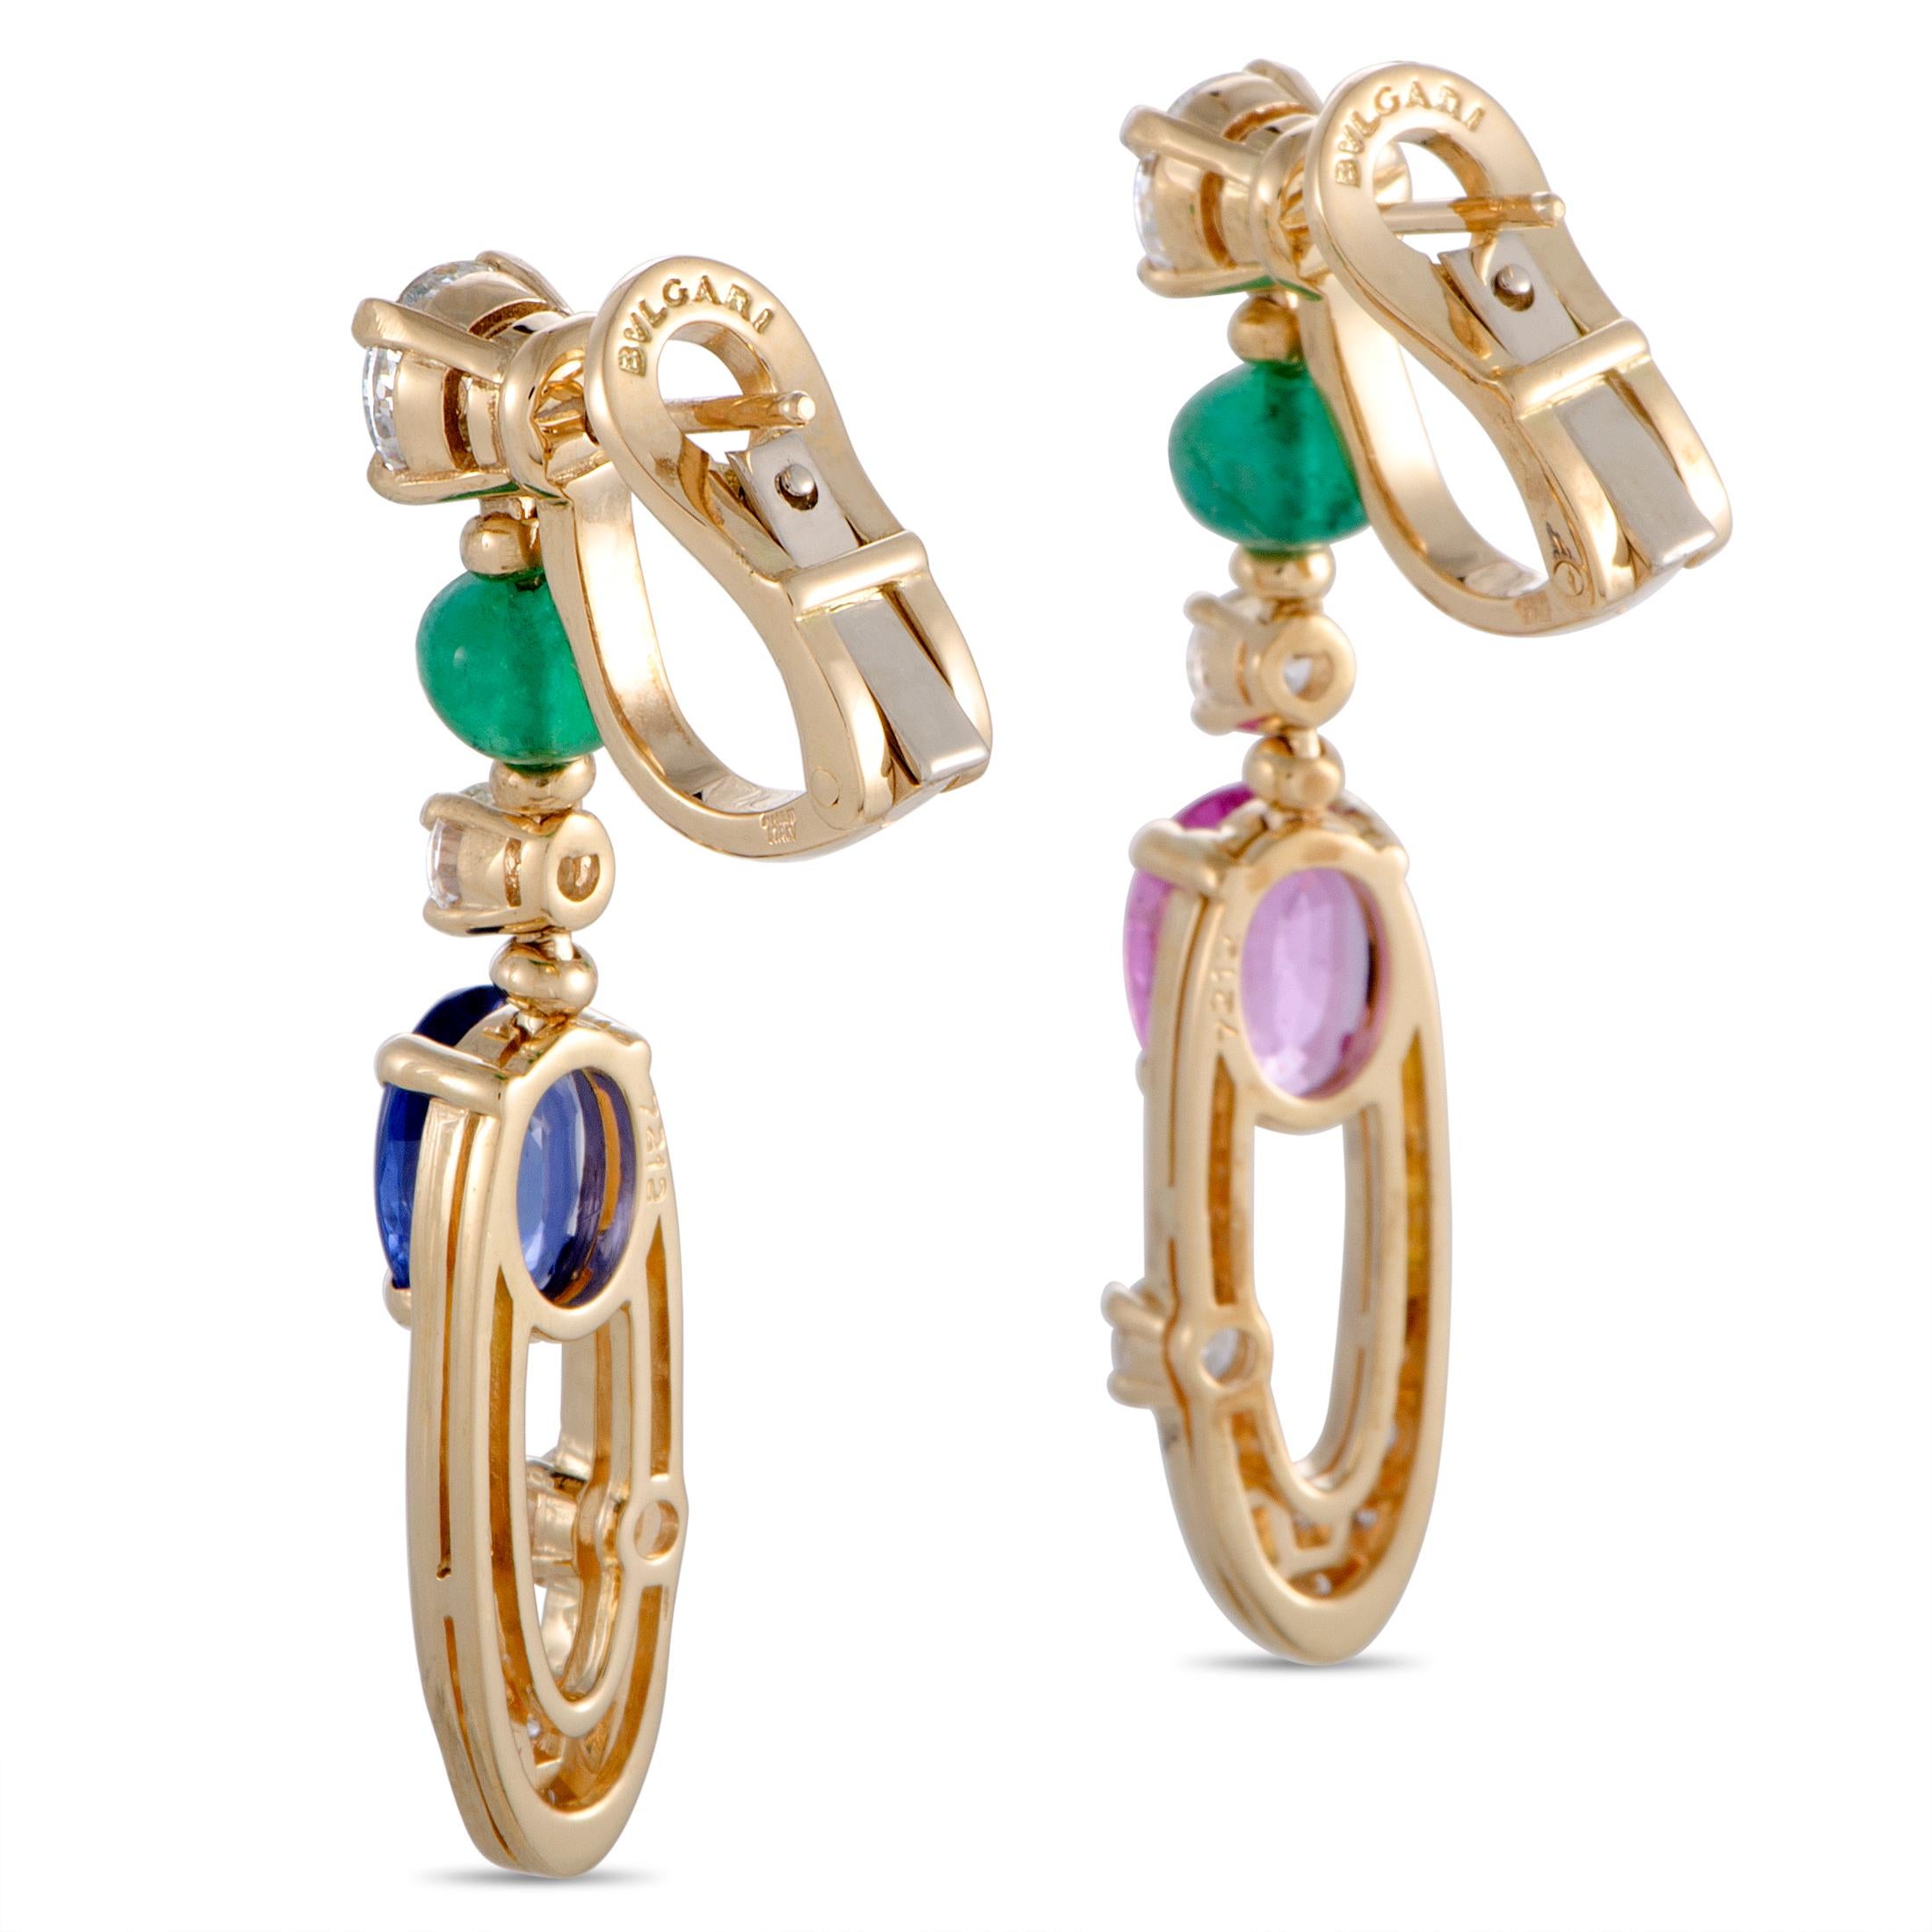 The Bvlgari “Elisia” earrings are made of 18K yellow gold and set with diamonds, emeralds, and blue and pink sapphires. The center diamonds boast grade G color and VS1 clarity and weigh 0.70 carats each (totaling 1.40 carats), while the side